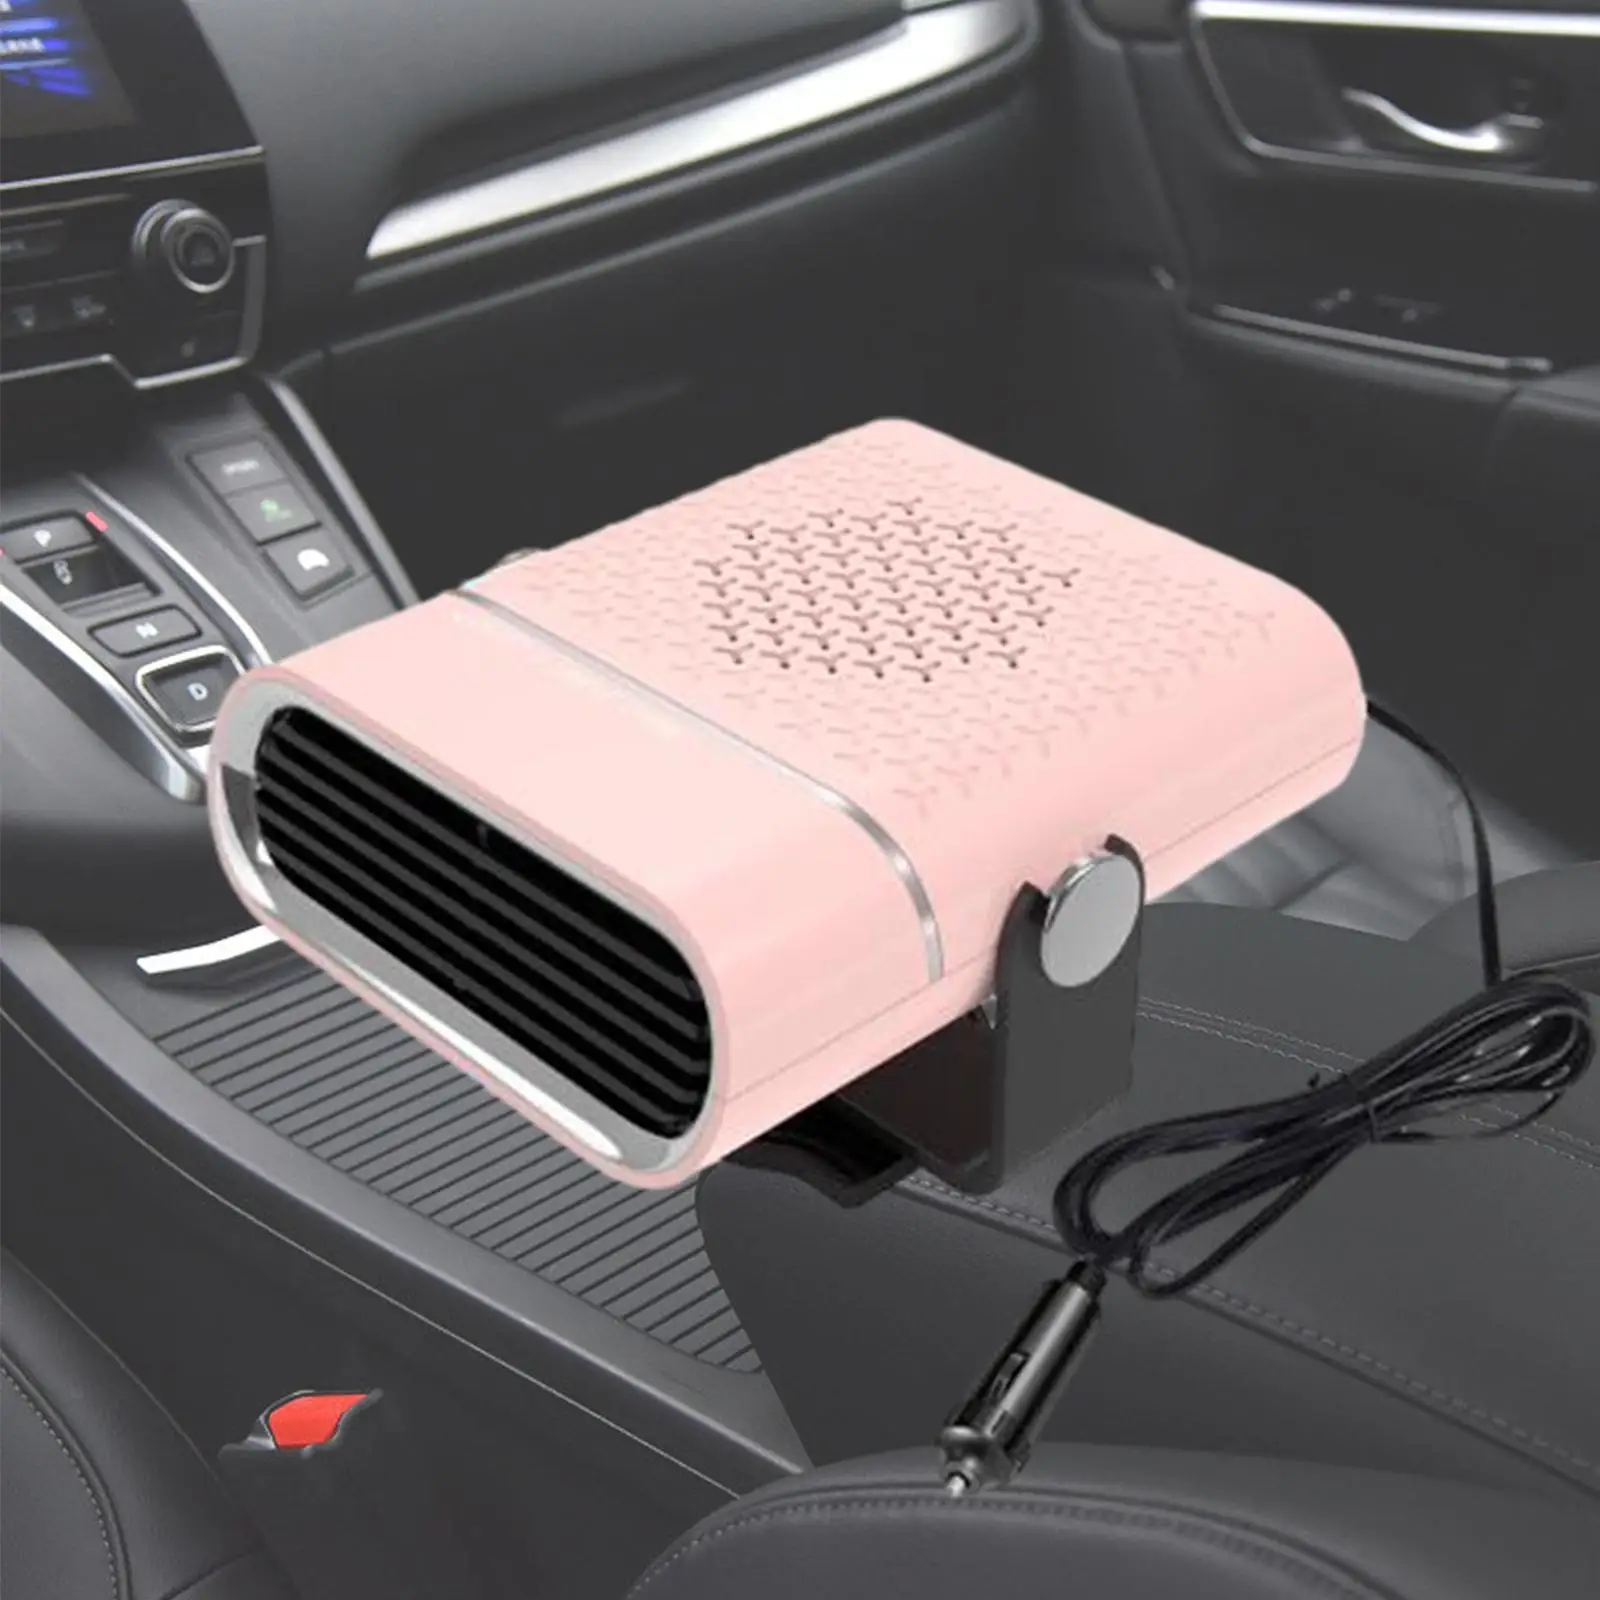 Car Heater for Winter 2 in 1 Rotatable Windshield Defroster Demister 260W Heating and Cooling Auto Vehicle Heater Car Fan Heater